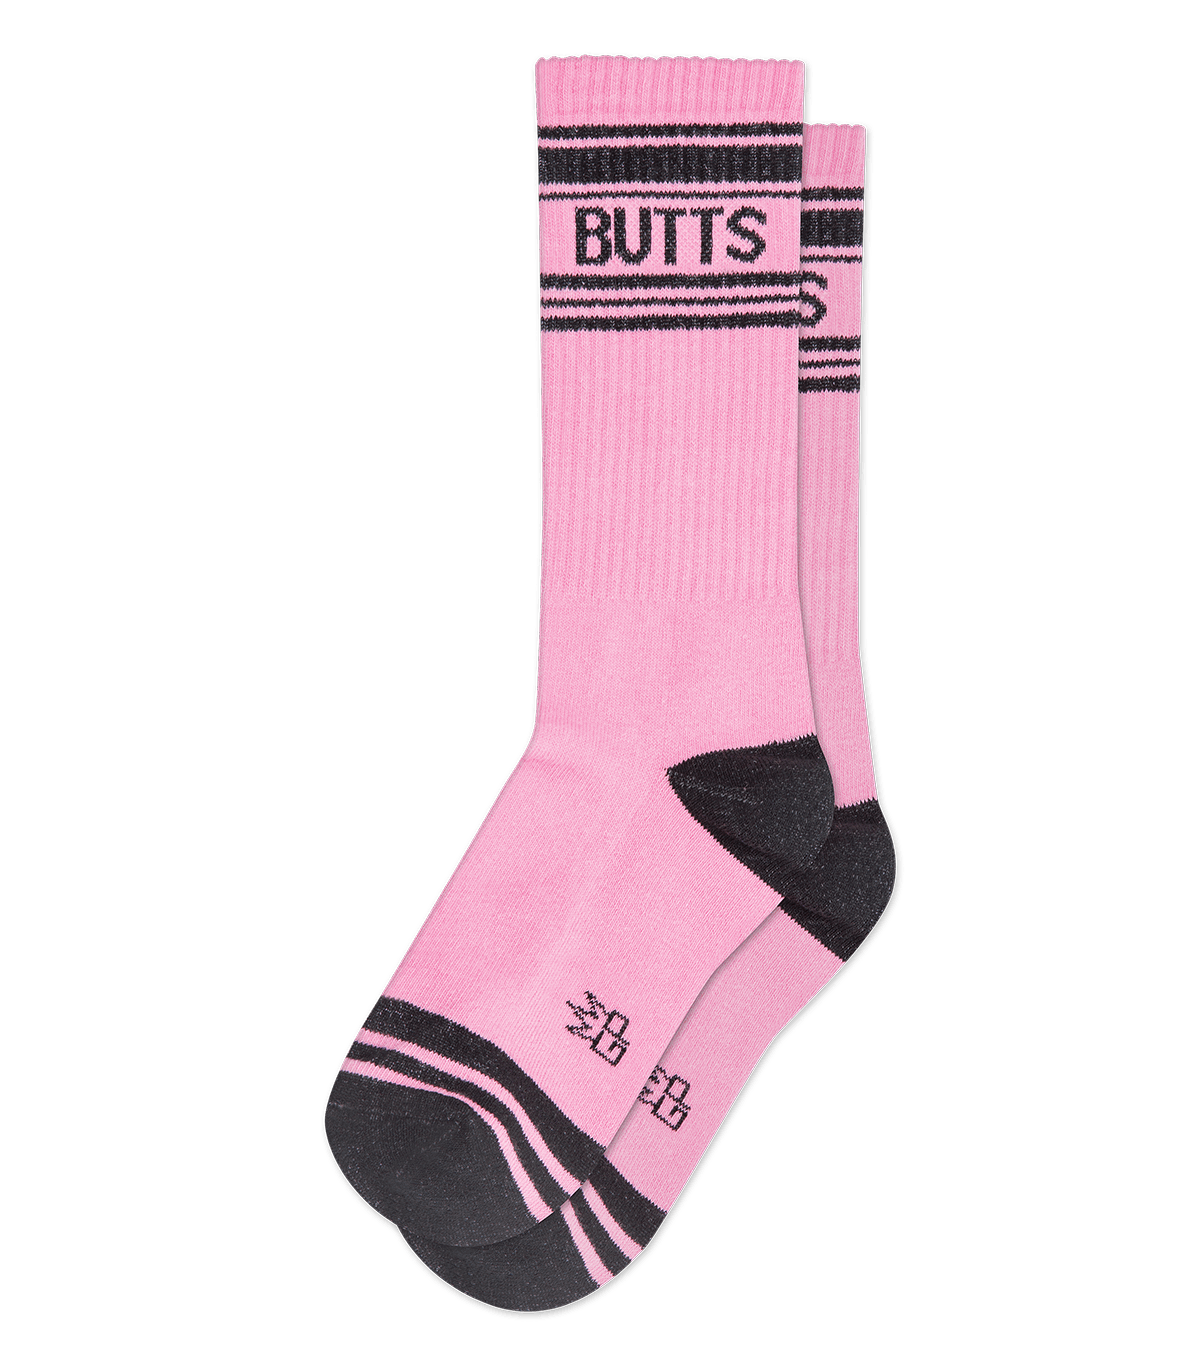 BUTTS Gym Socks – Gumball Poodle